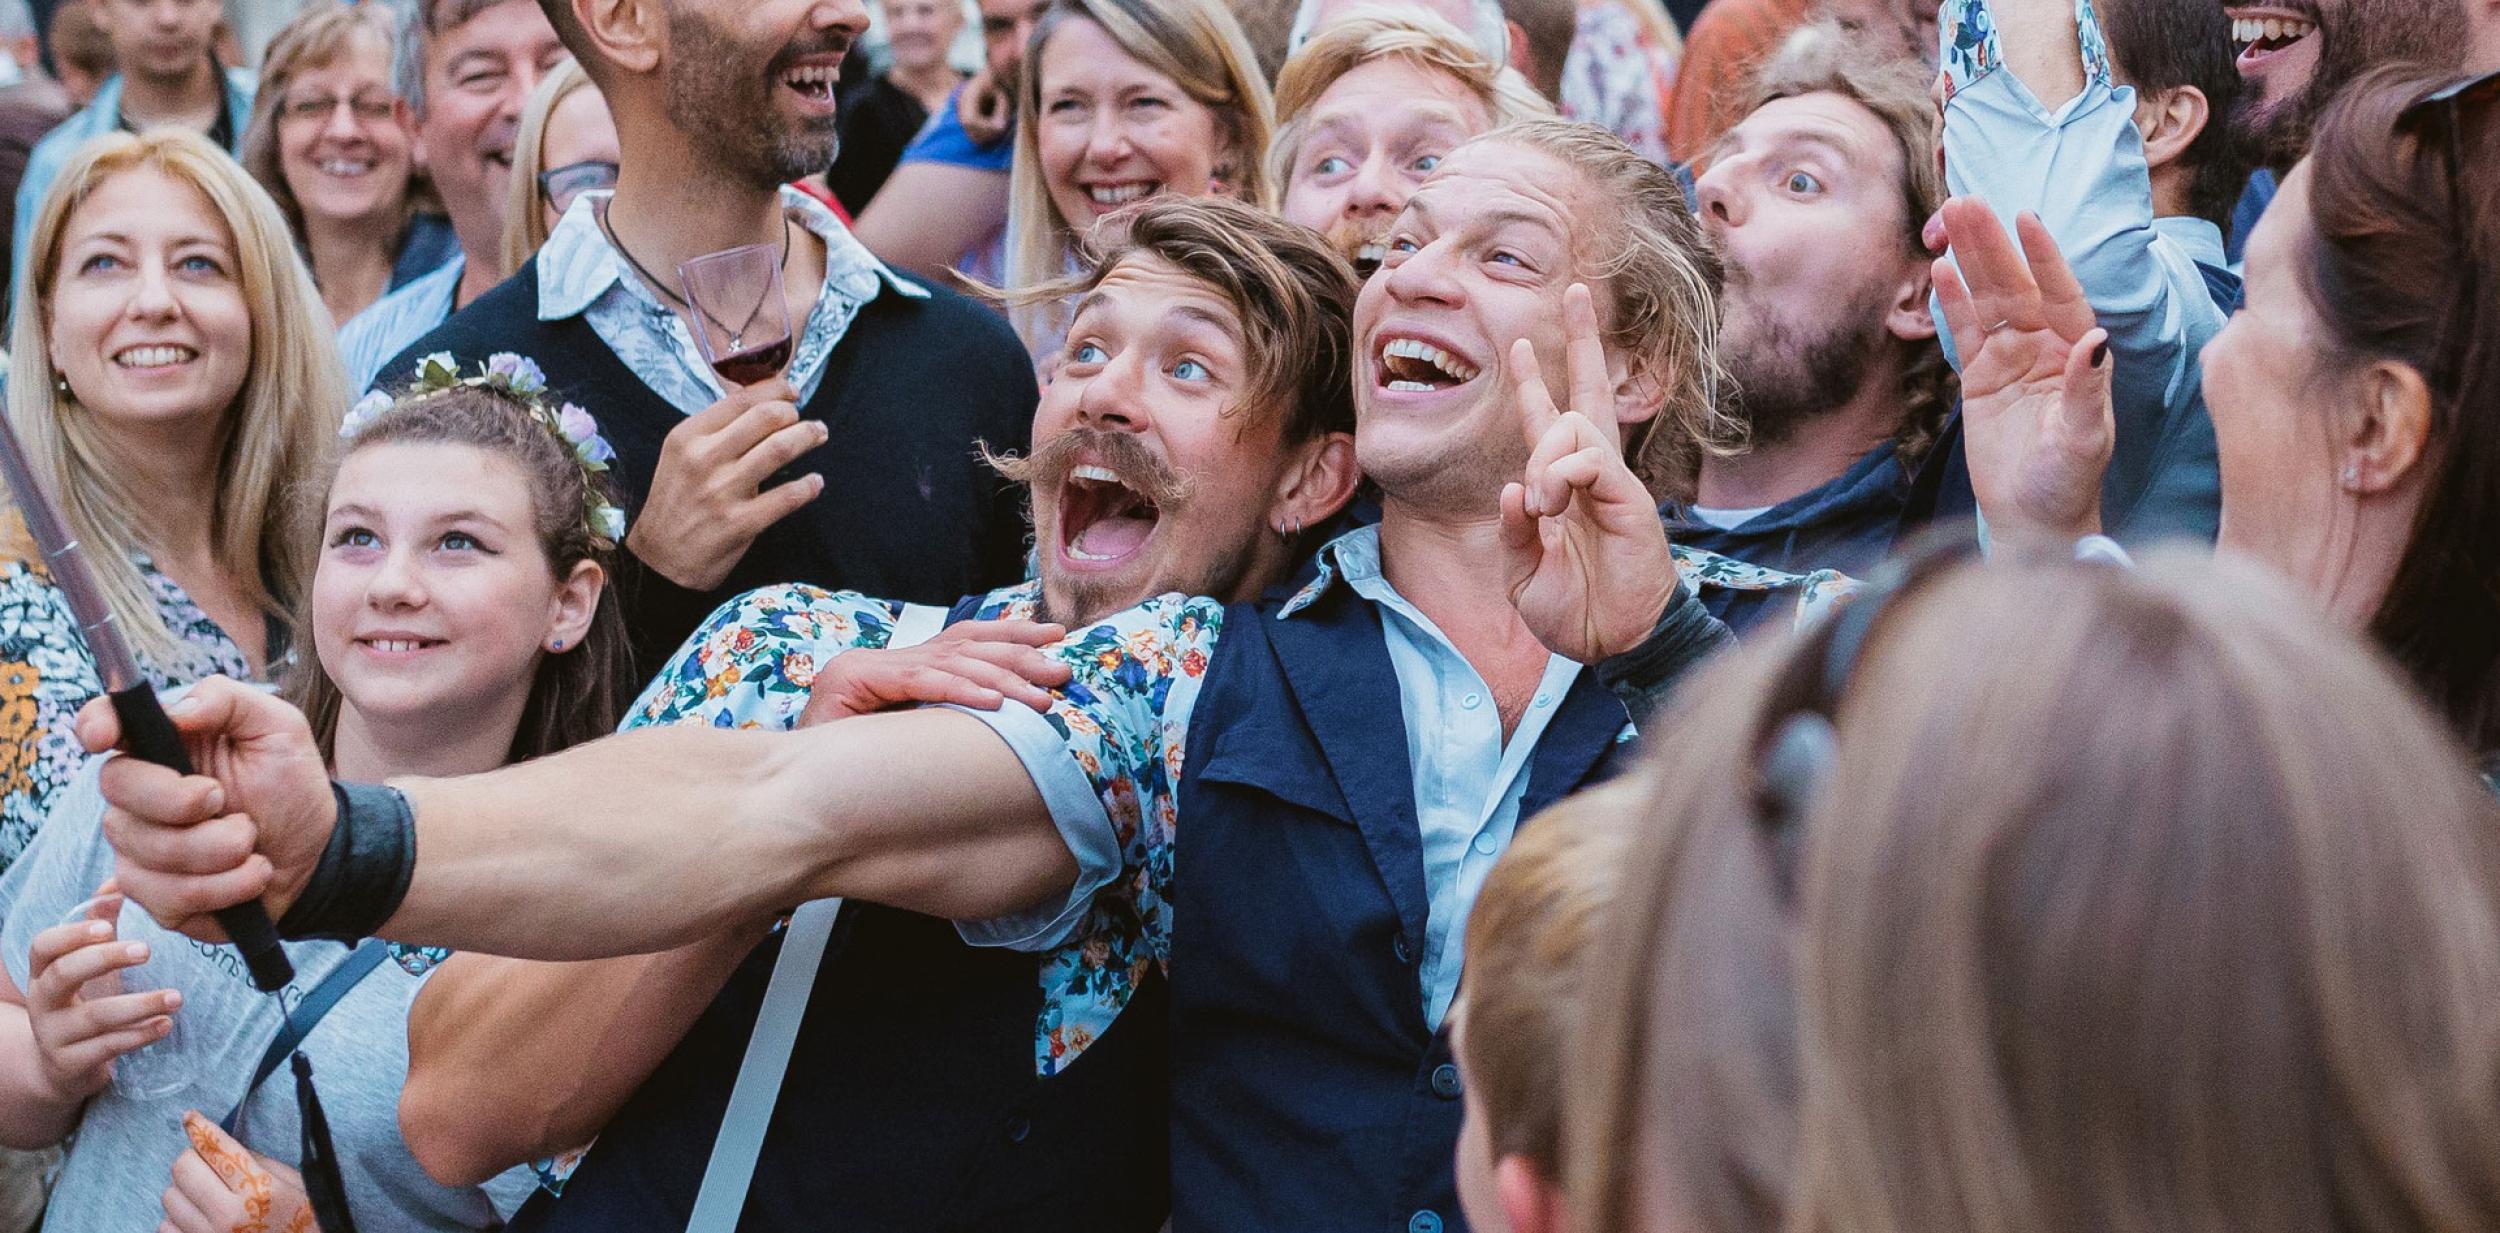 Performers taking a selfie with a huge smiling crowd of people.